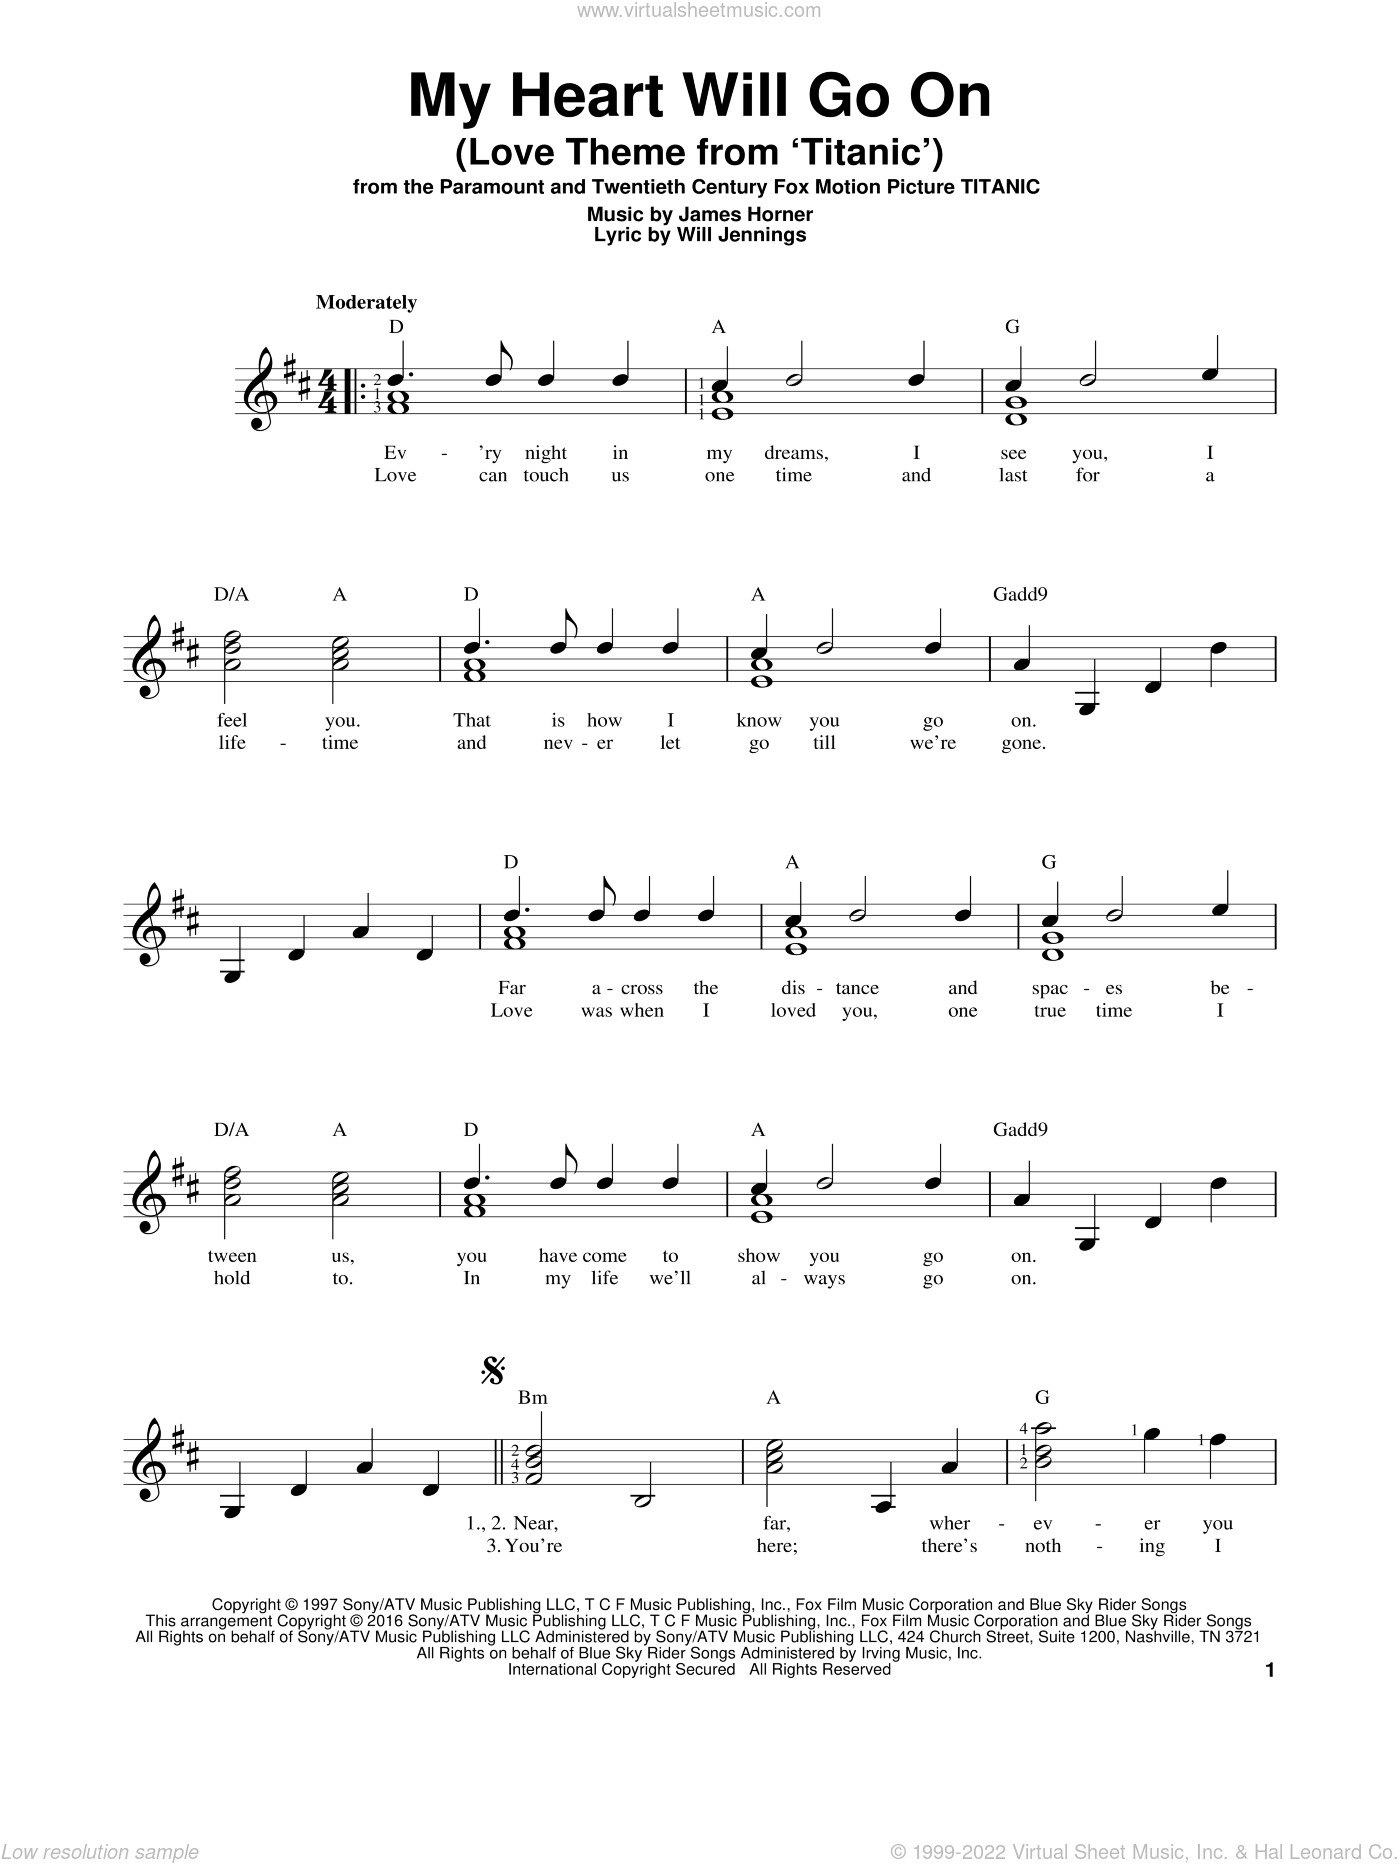 My Heart Will Go On (Love Theme From Titanic) sheet music for guitar solo ( chords) v2